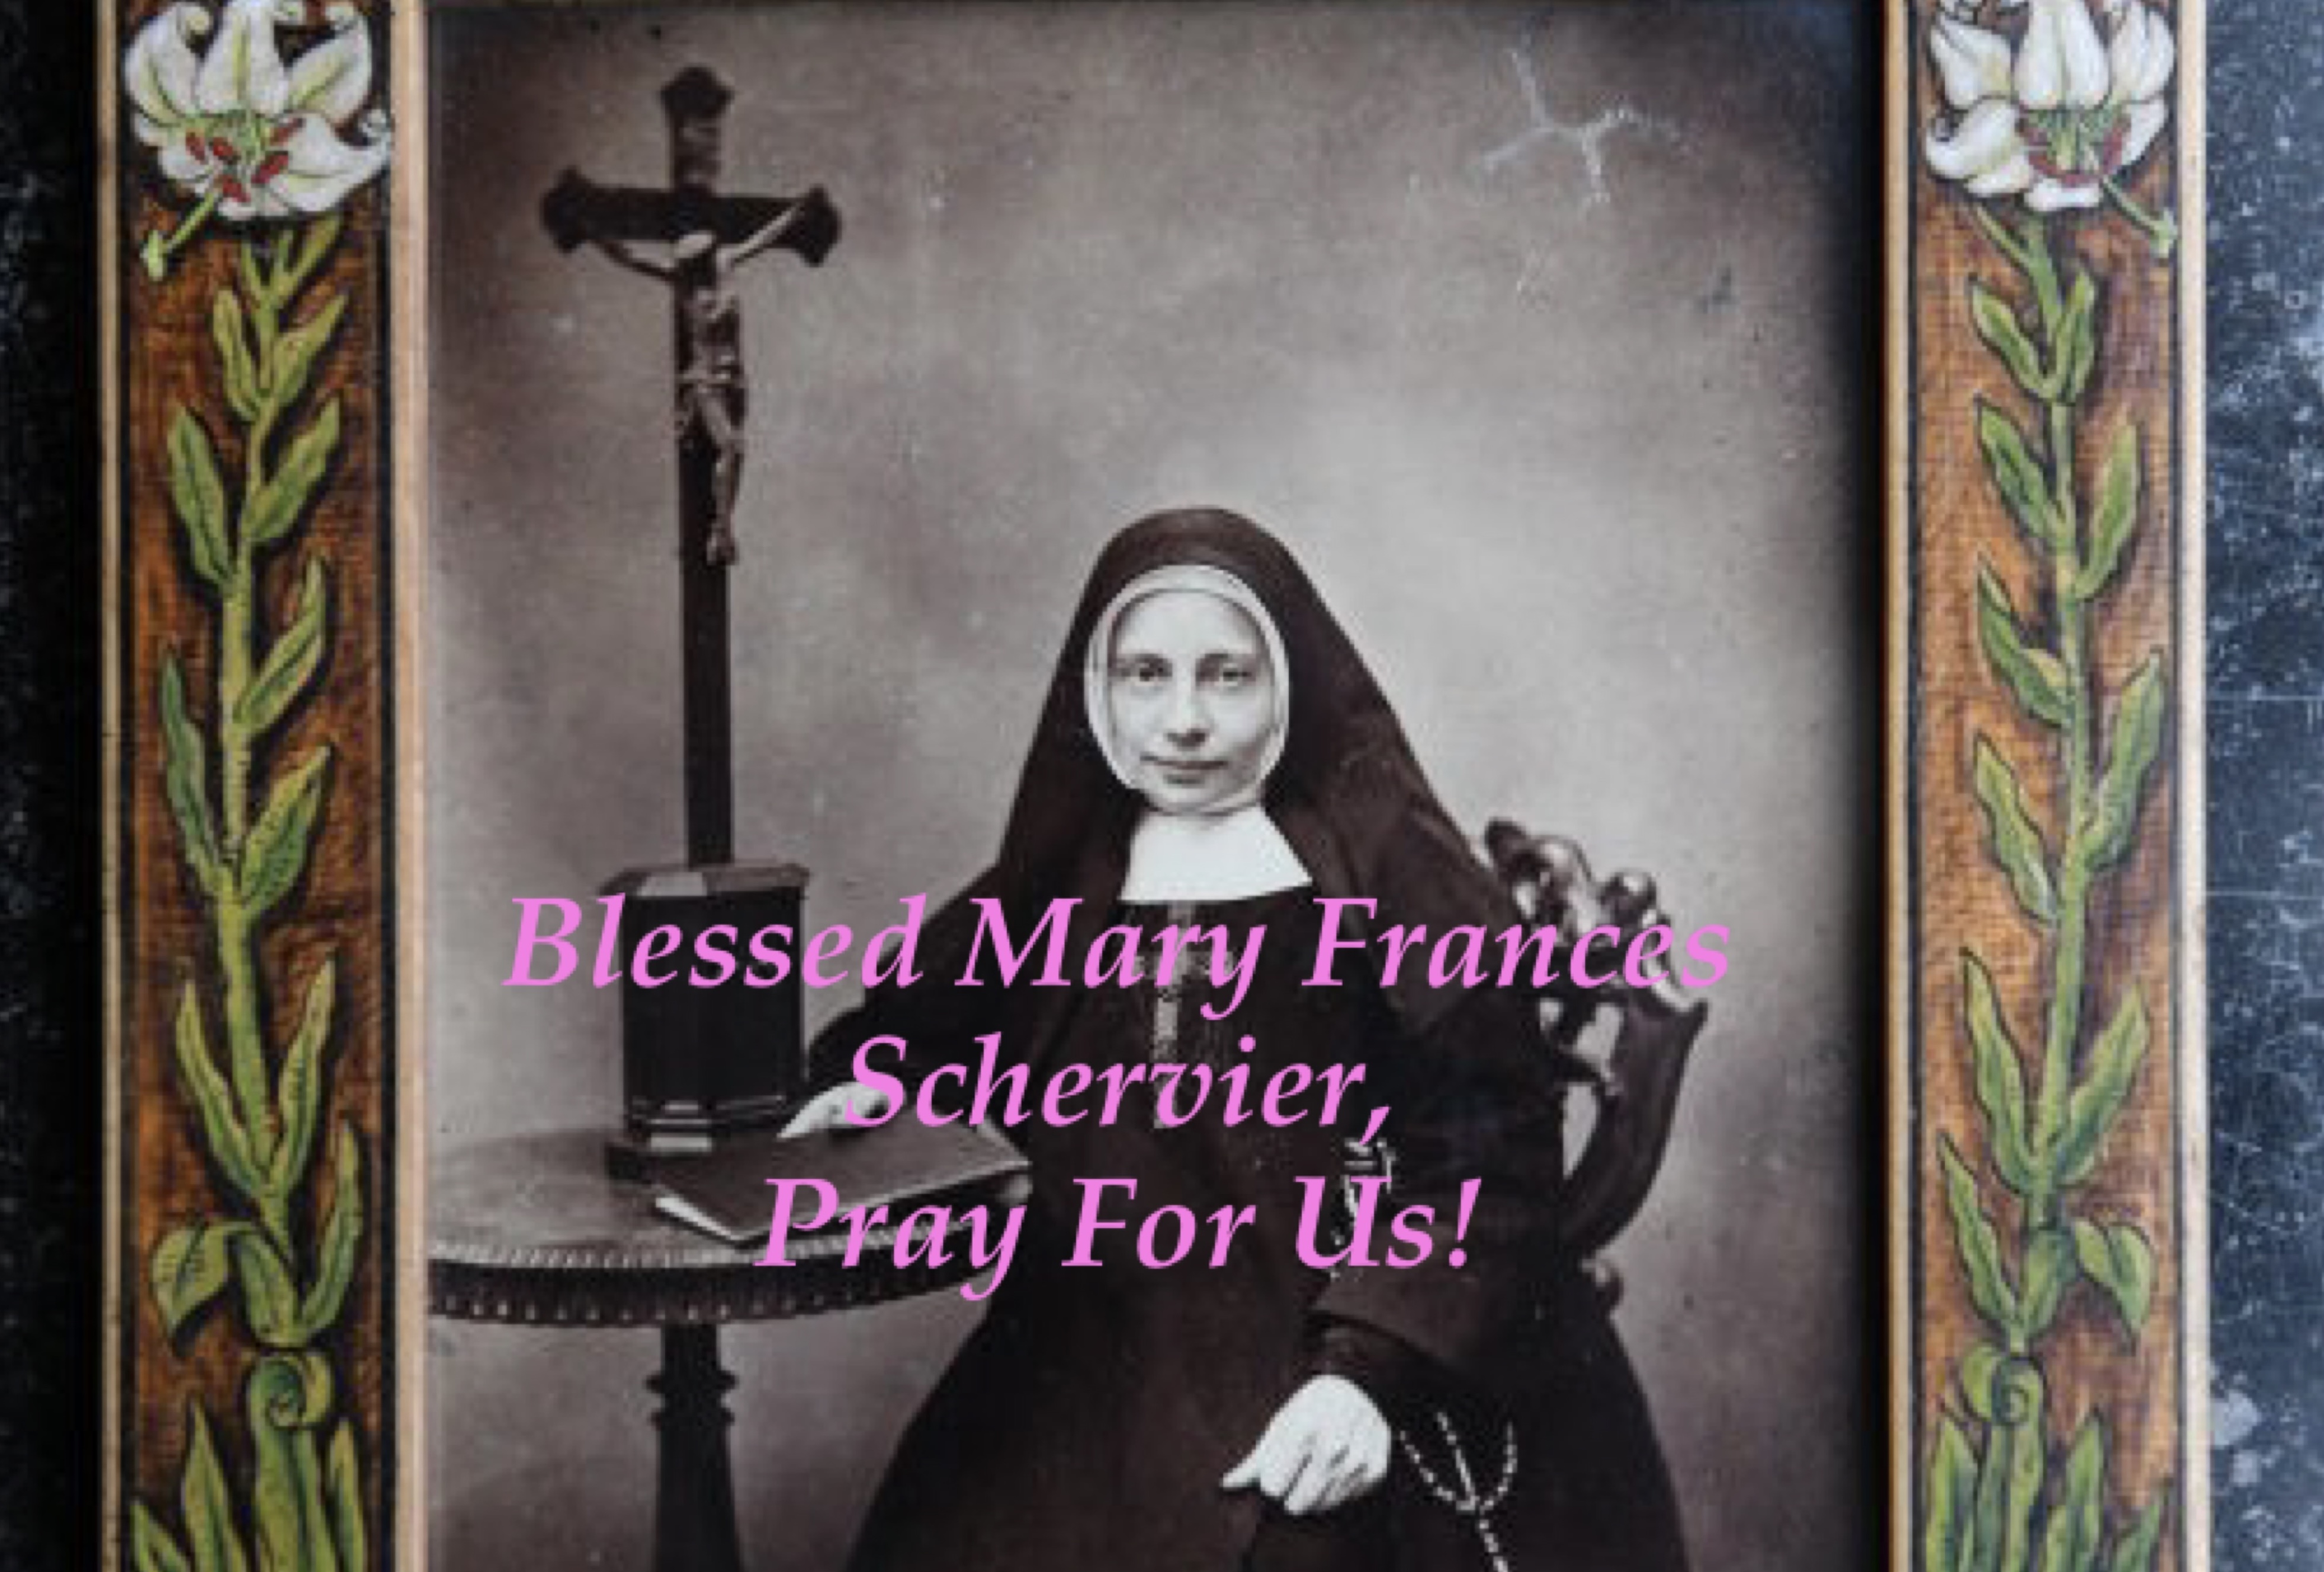 15th December - Blessed Mary Frances Schervier